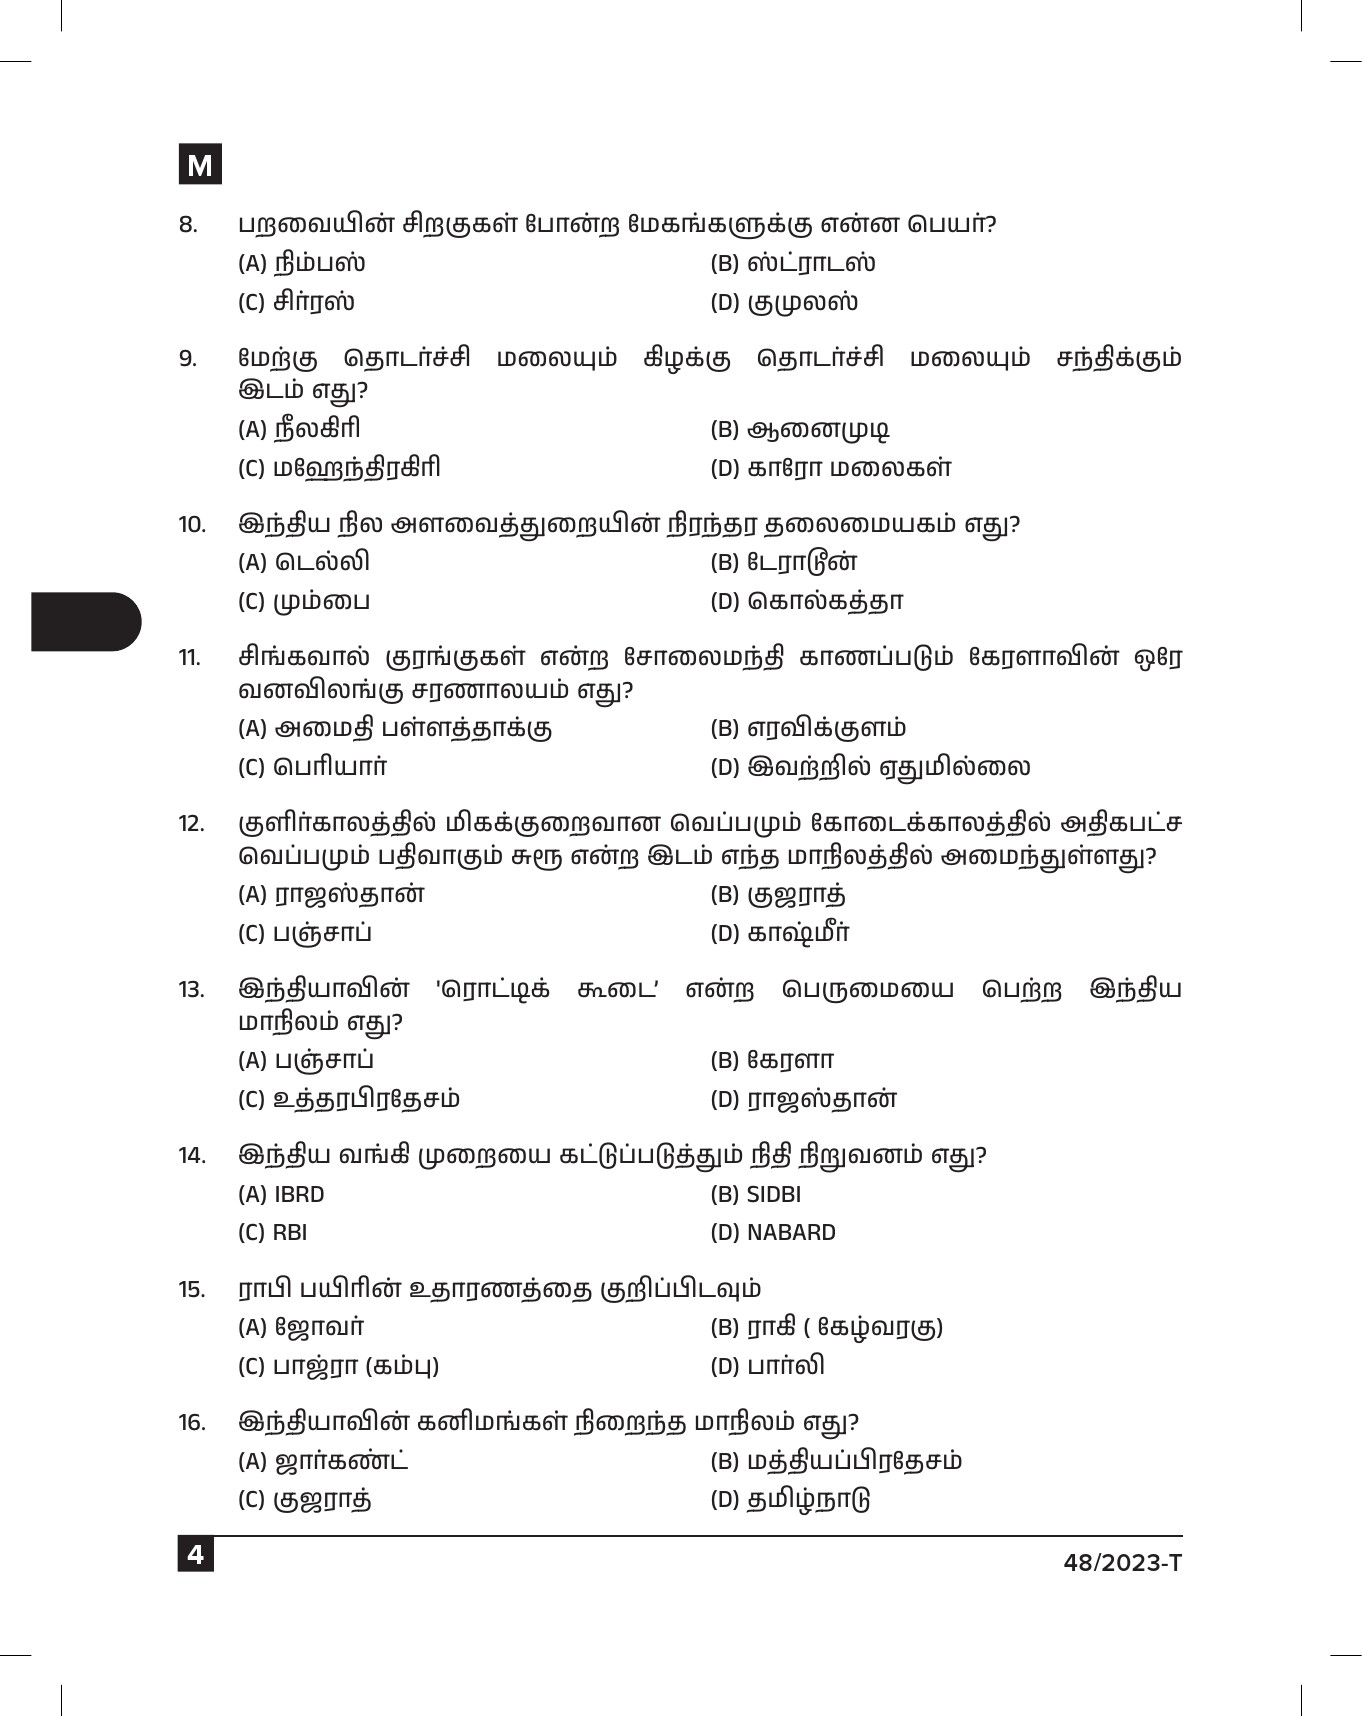 KPSC Fire and Rescue Officer Tamil Exam 2023 Code 0482023 T 3